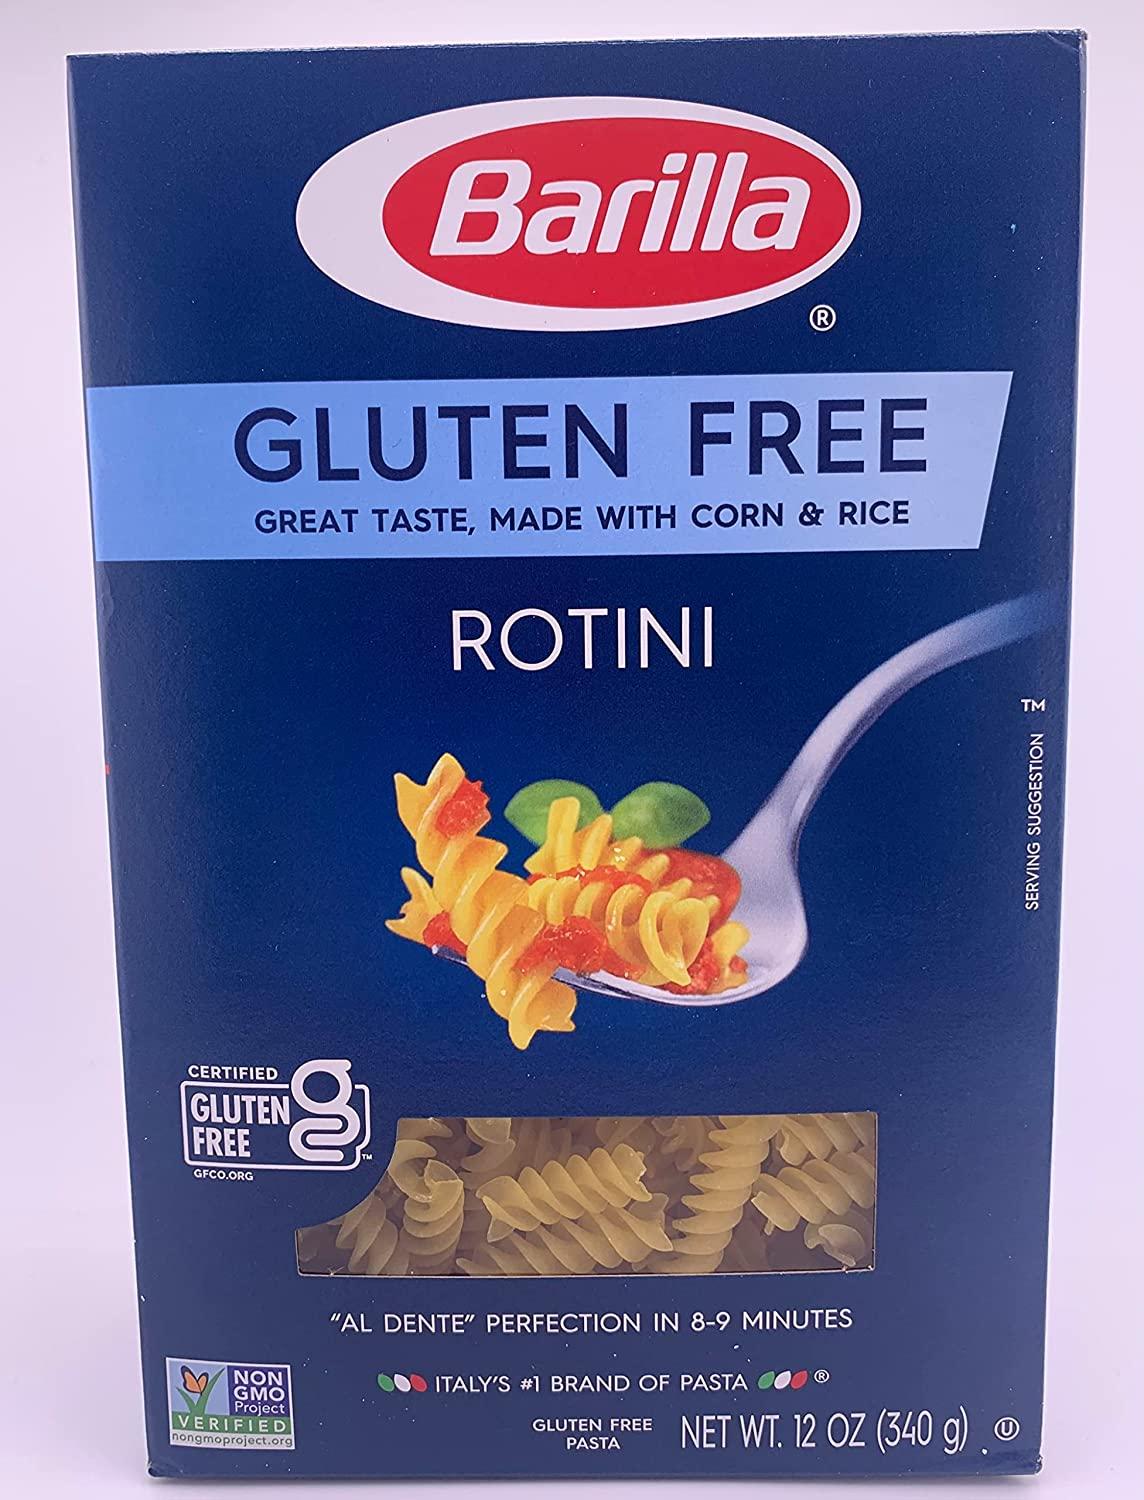 Barilla Gluten Free Pasta (3 Macaroni x Pasta Variety and Set Pasta Penne Inspired 12oz by Noodles. Pasta, Elbow Barilla Pack- Bulk Candy Rotini Includes Pasta